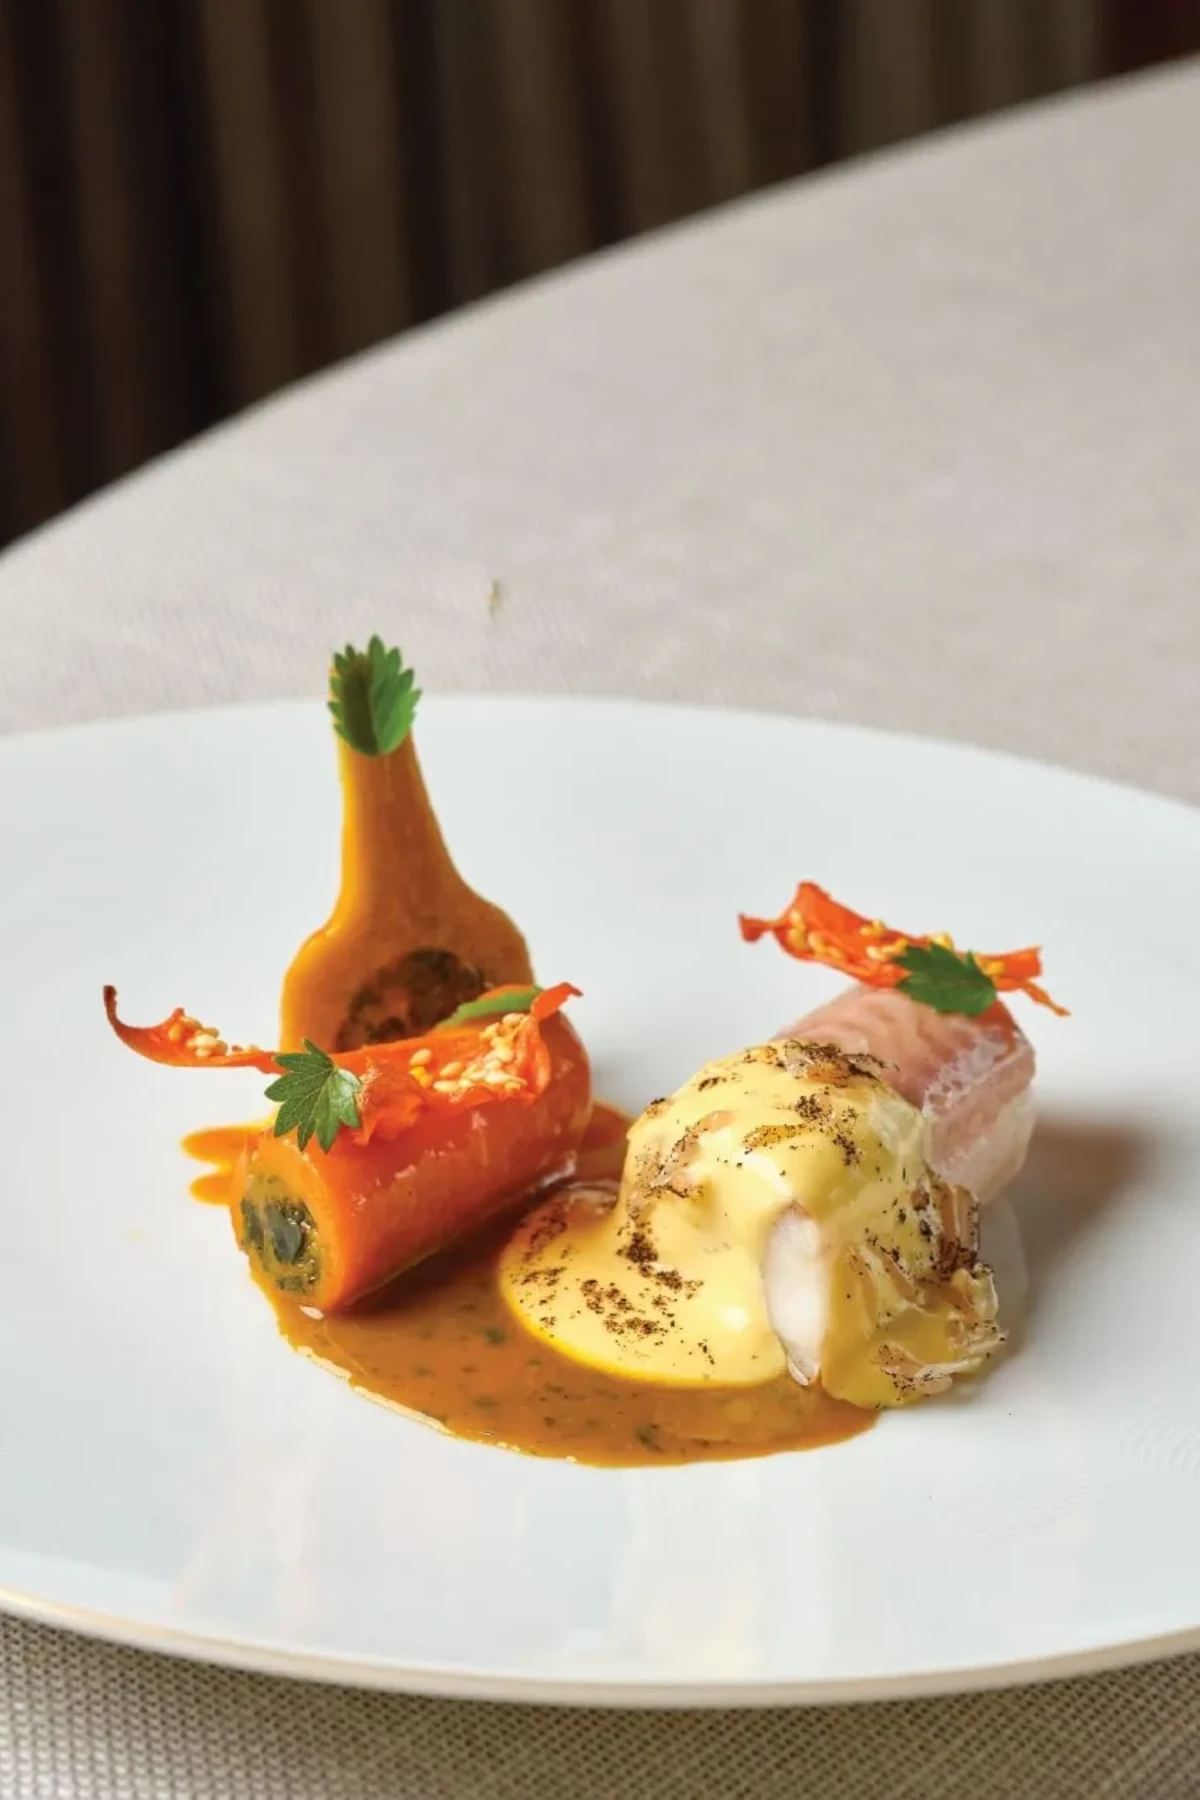 Delicate flavors of carrots and artichokes at Alain Ducasse, a French restaurant in Bangkok.